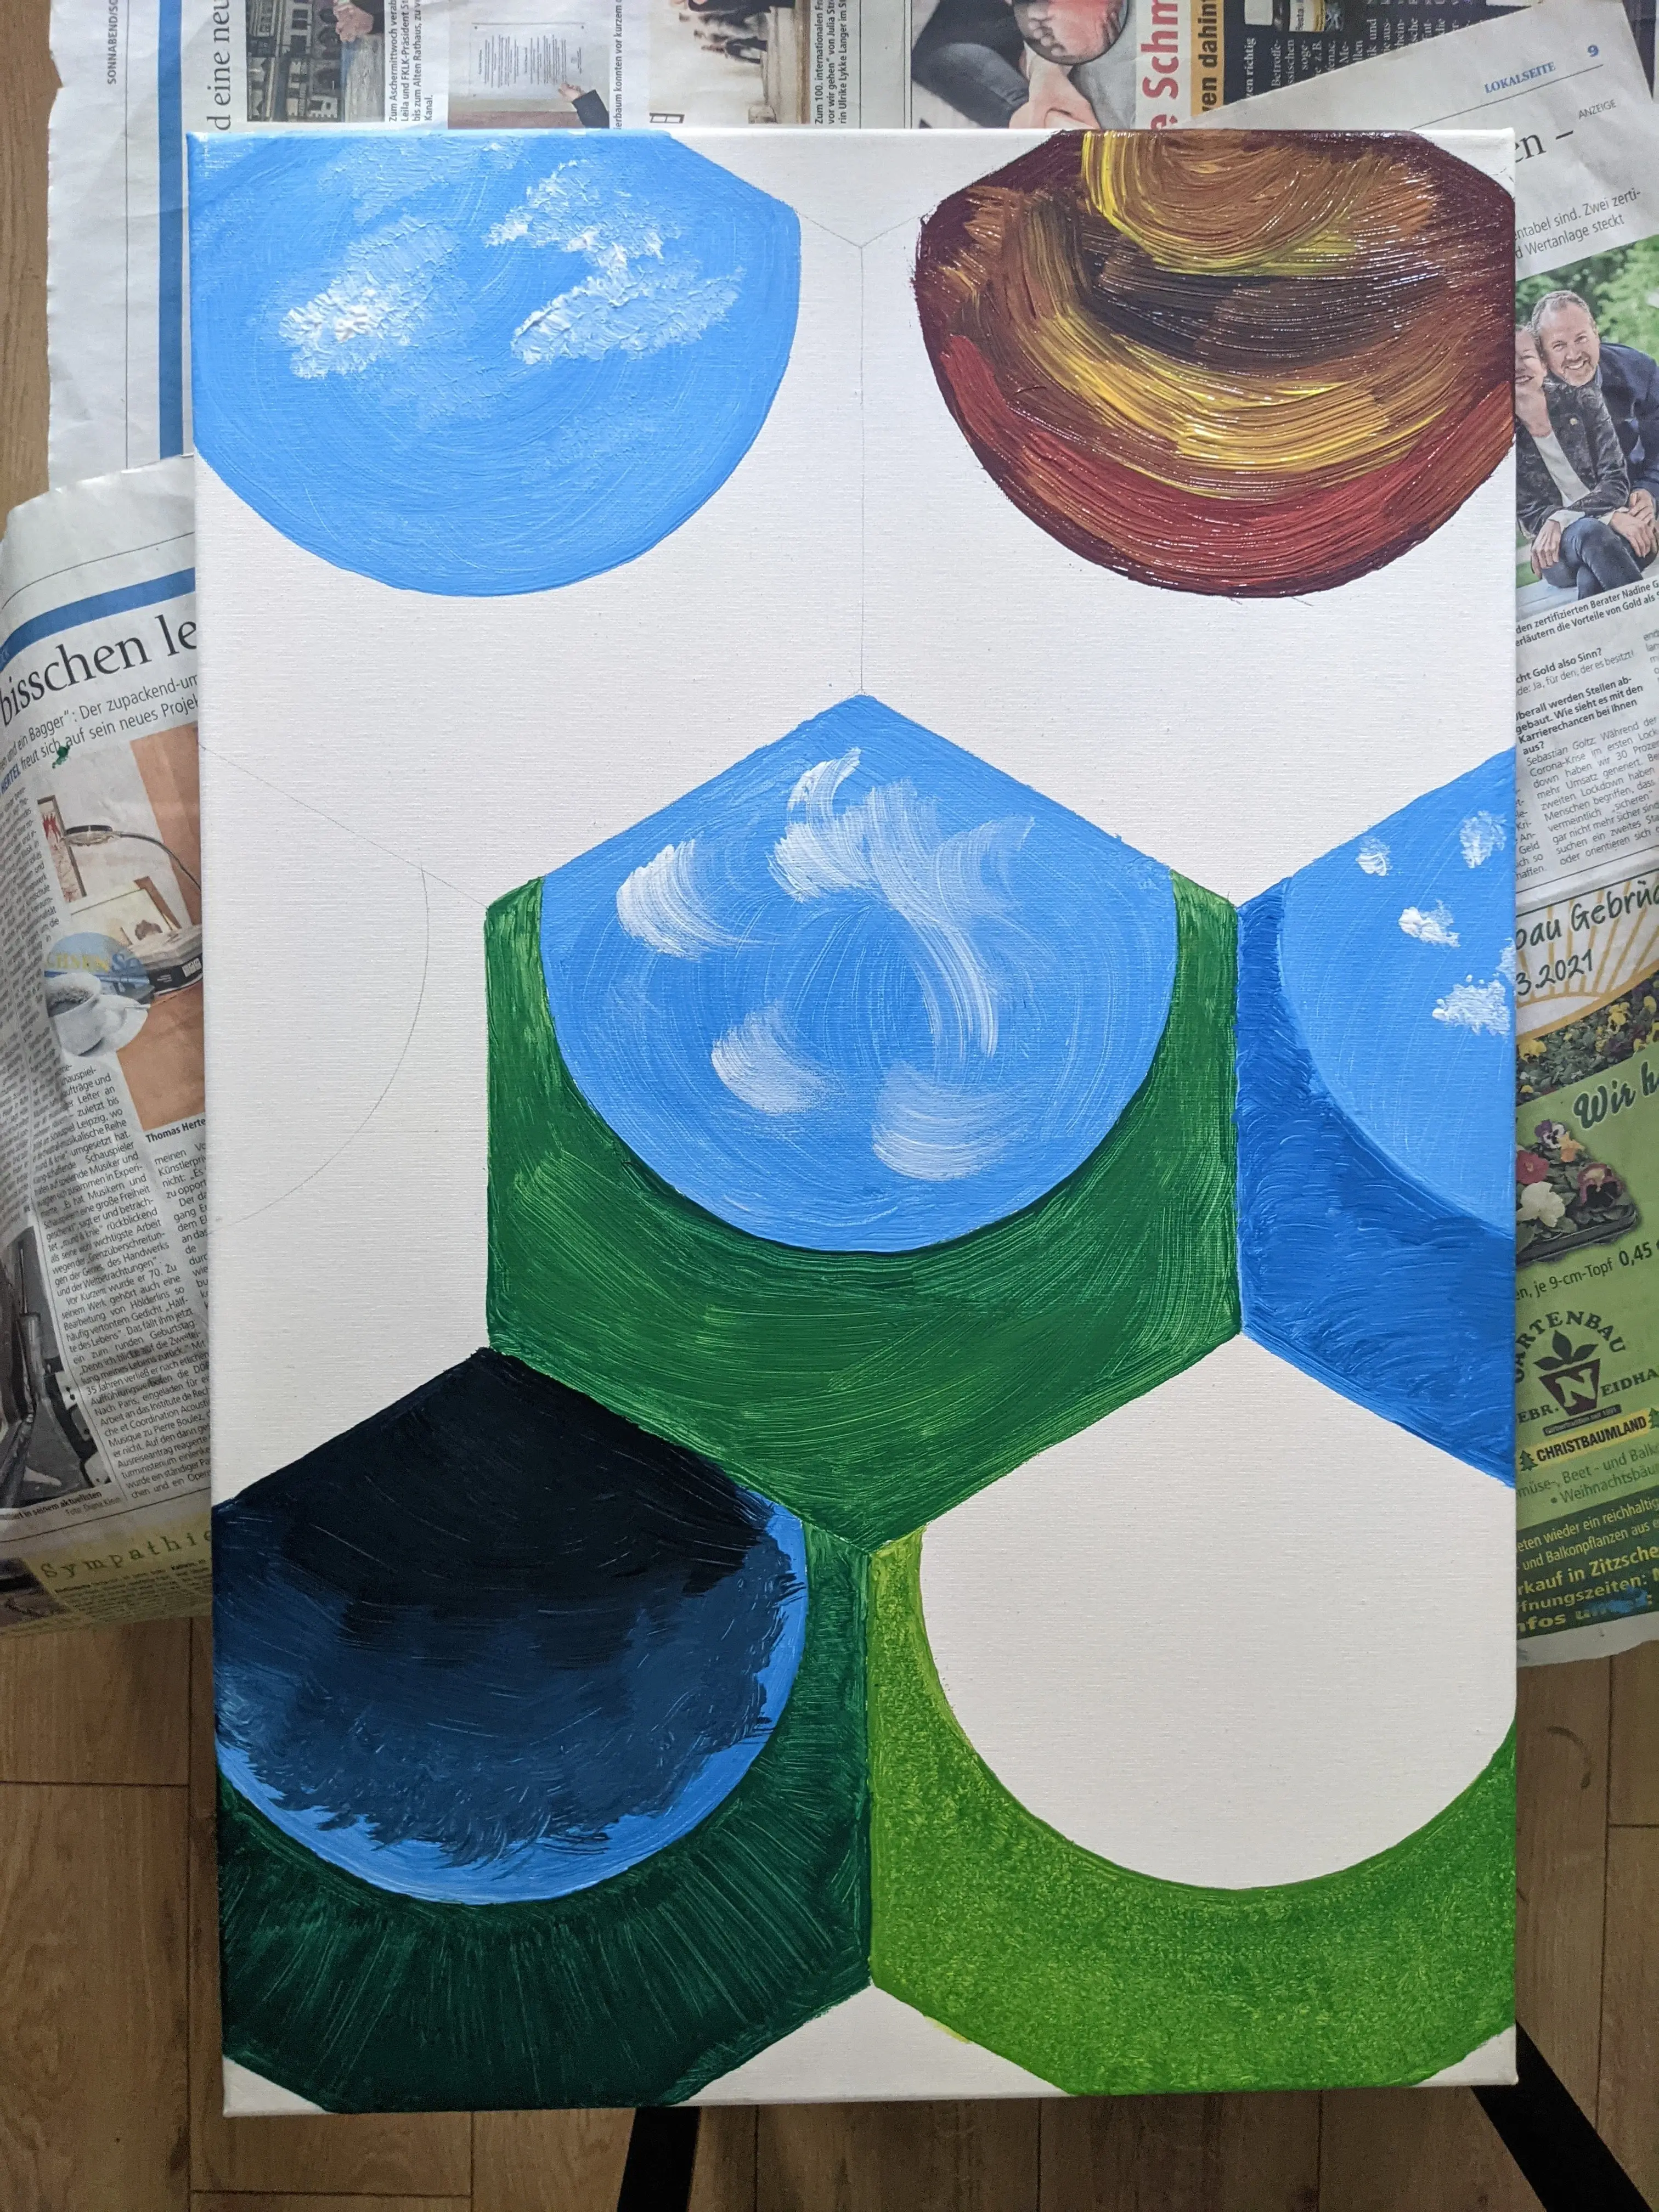 More hexagonal tiles got their background filled with blues and greens